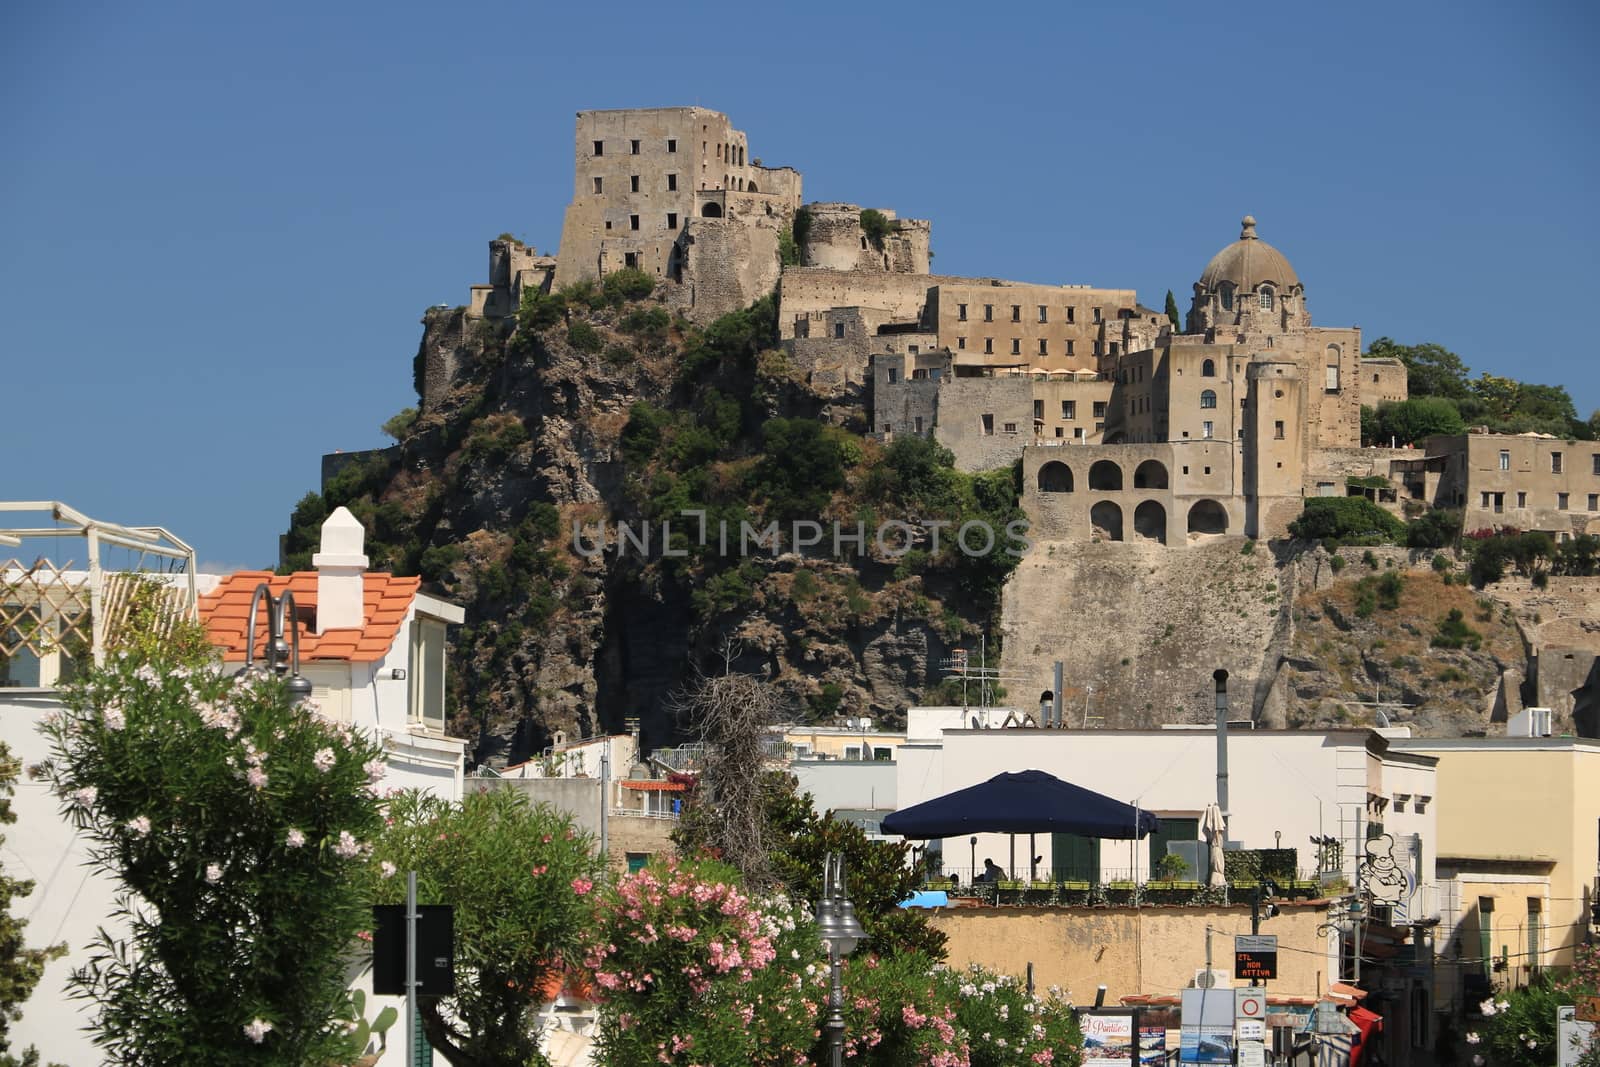 Ancient Aragonese Castle in Ischia Ponte. The fortification stands on a peninsula of volcanic rock connected to the village of Ponte. Ischia, Naples, Italy. 